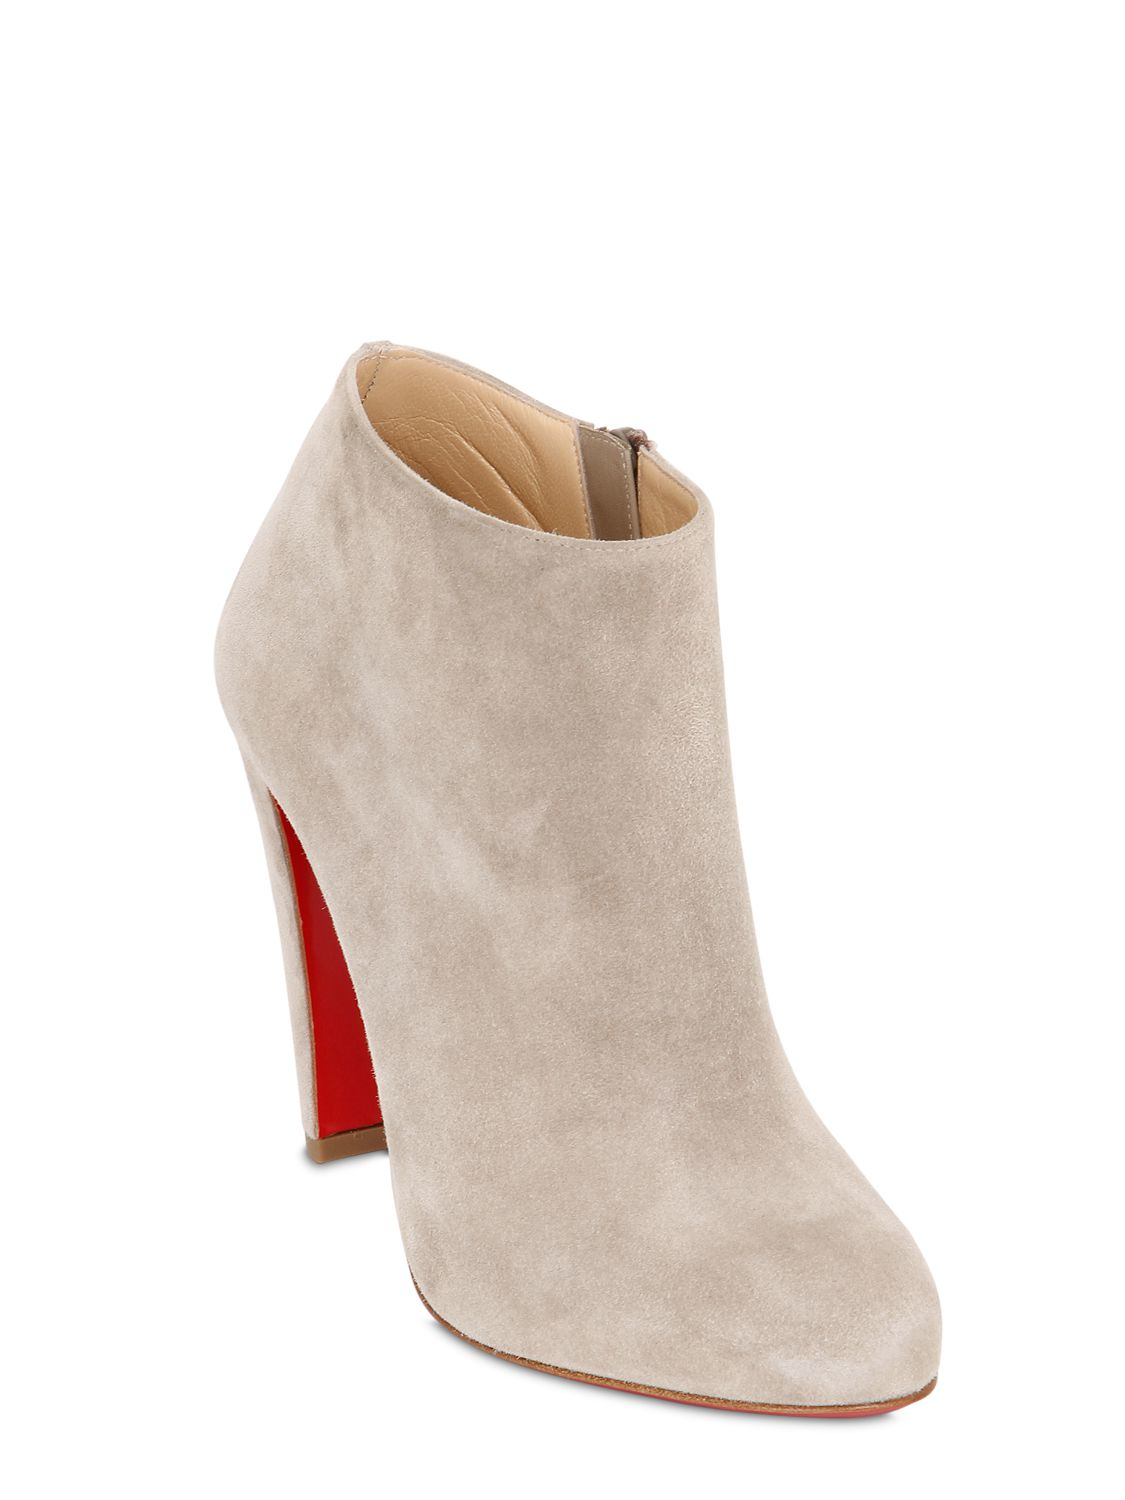 Christian louboutin Bobsleigh Suede Ankle Boots in Beige | Lyst